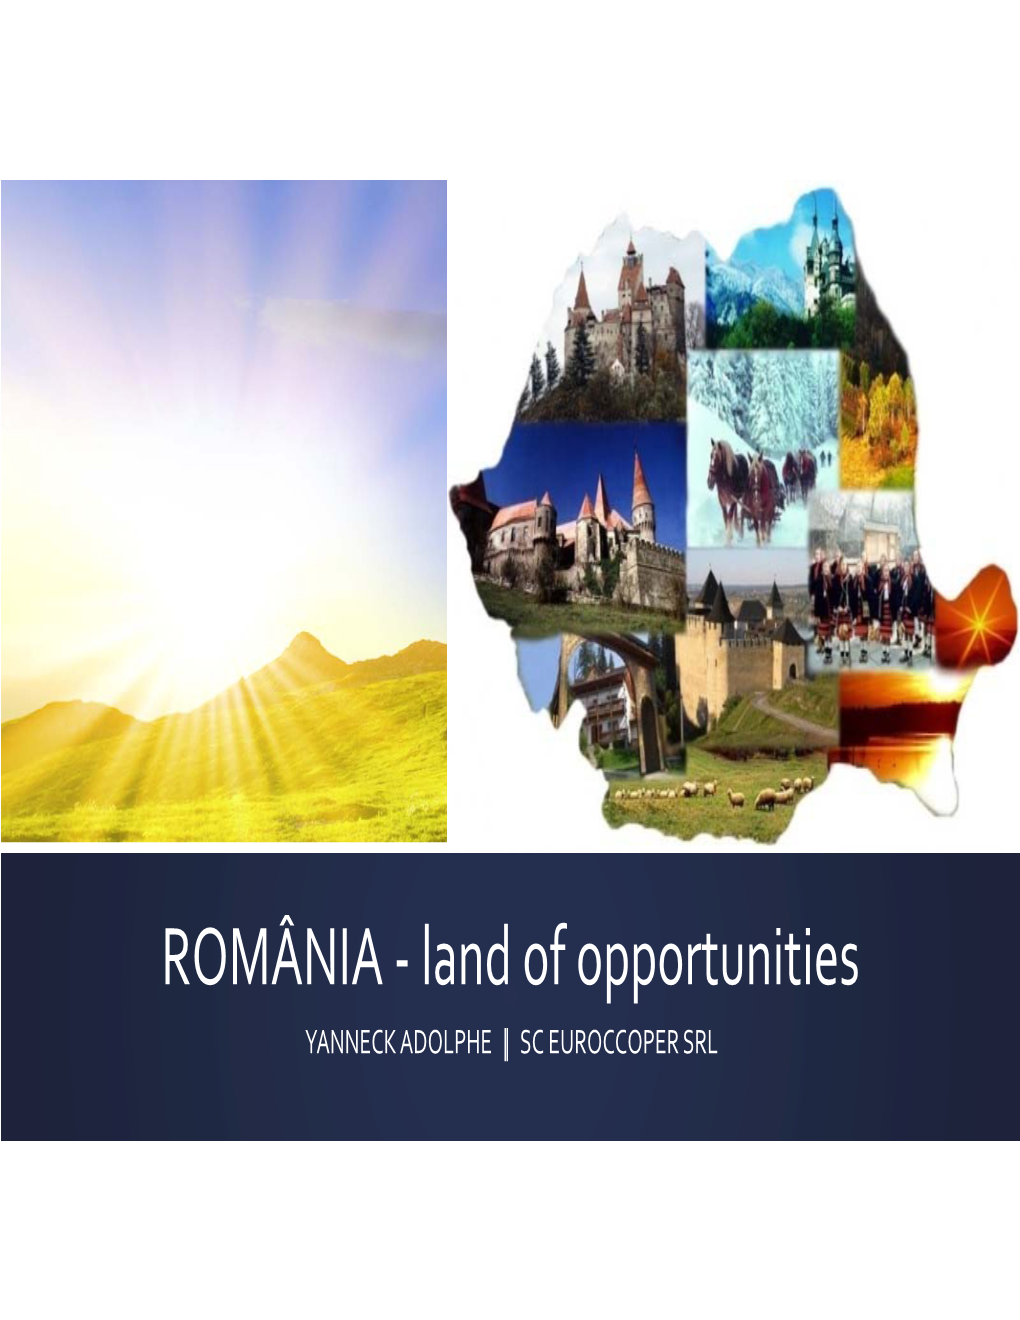 ROMÂNIA ‐ Land of Opportunities YANNECK ADOLPHE || SC EUROCCOPER SRL an International Team of Professionals Providing the Best Cost Effective Solutions